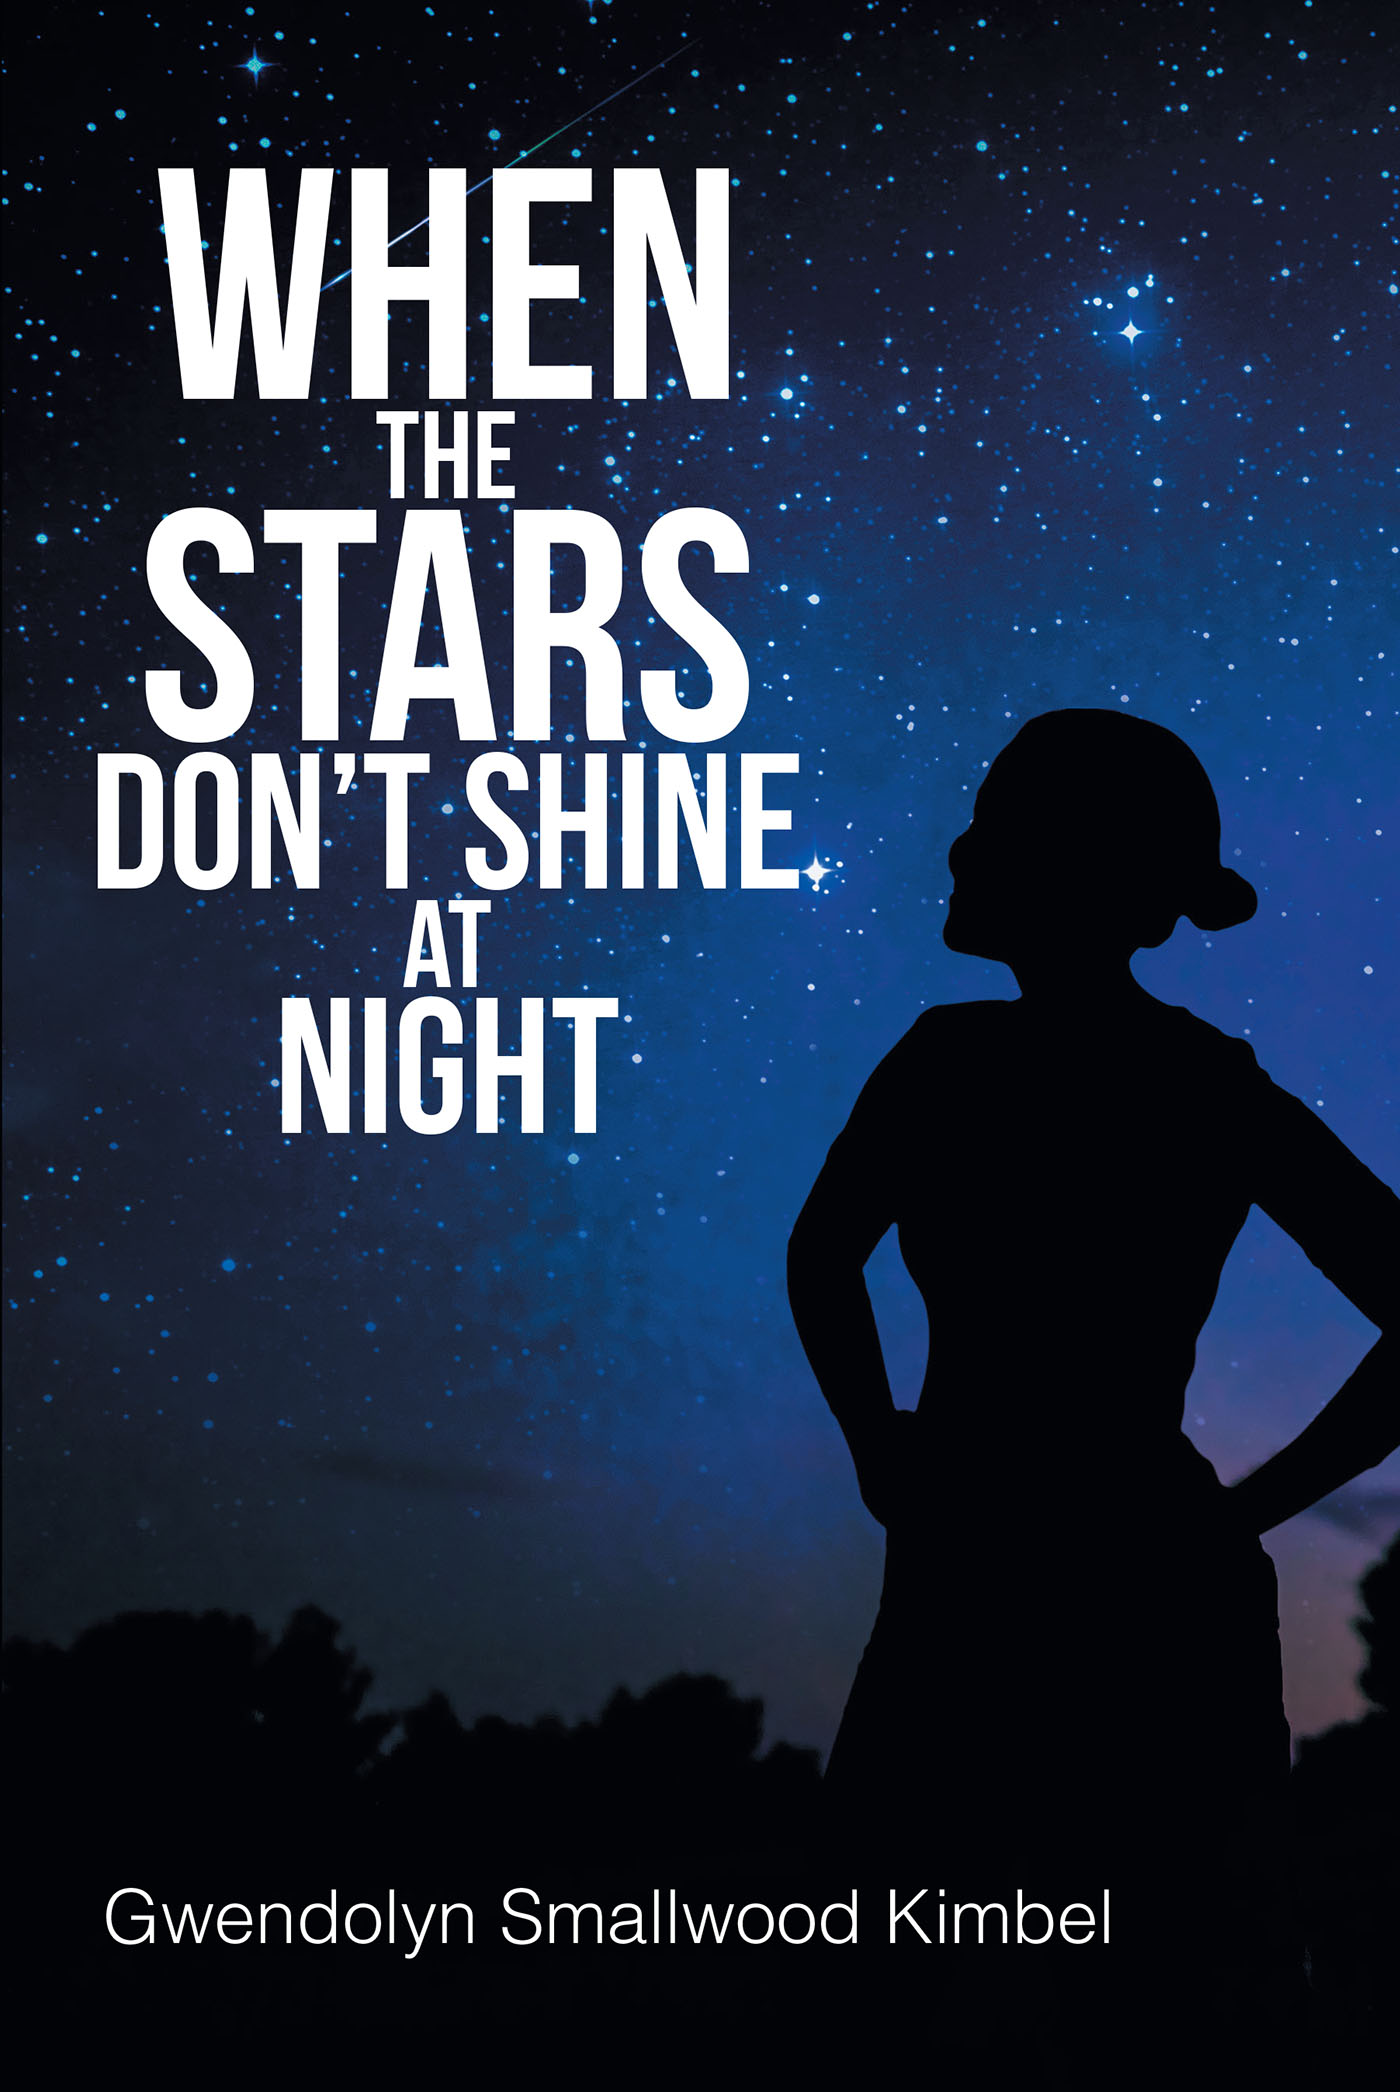 Gwendolyn Smallwood Kimbel’s Newly Released “When the Stars Don’t Shine at Night” is a Powerful Account of One Woman’s Spiritual Awakening